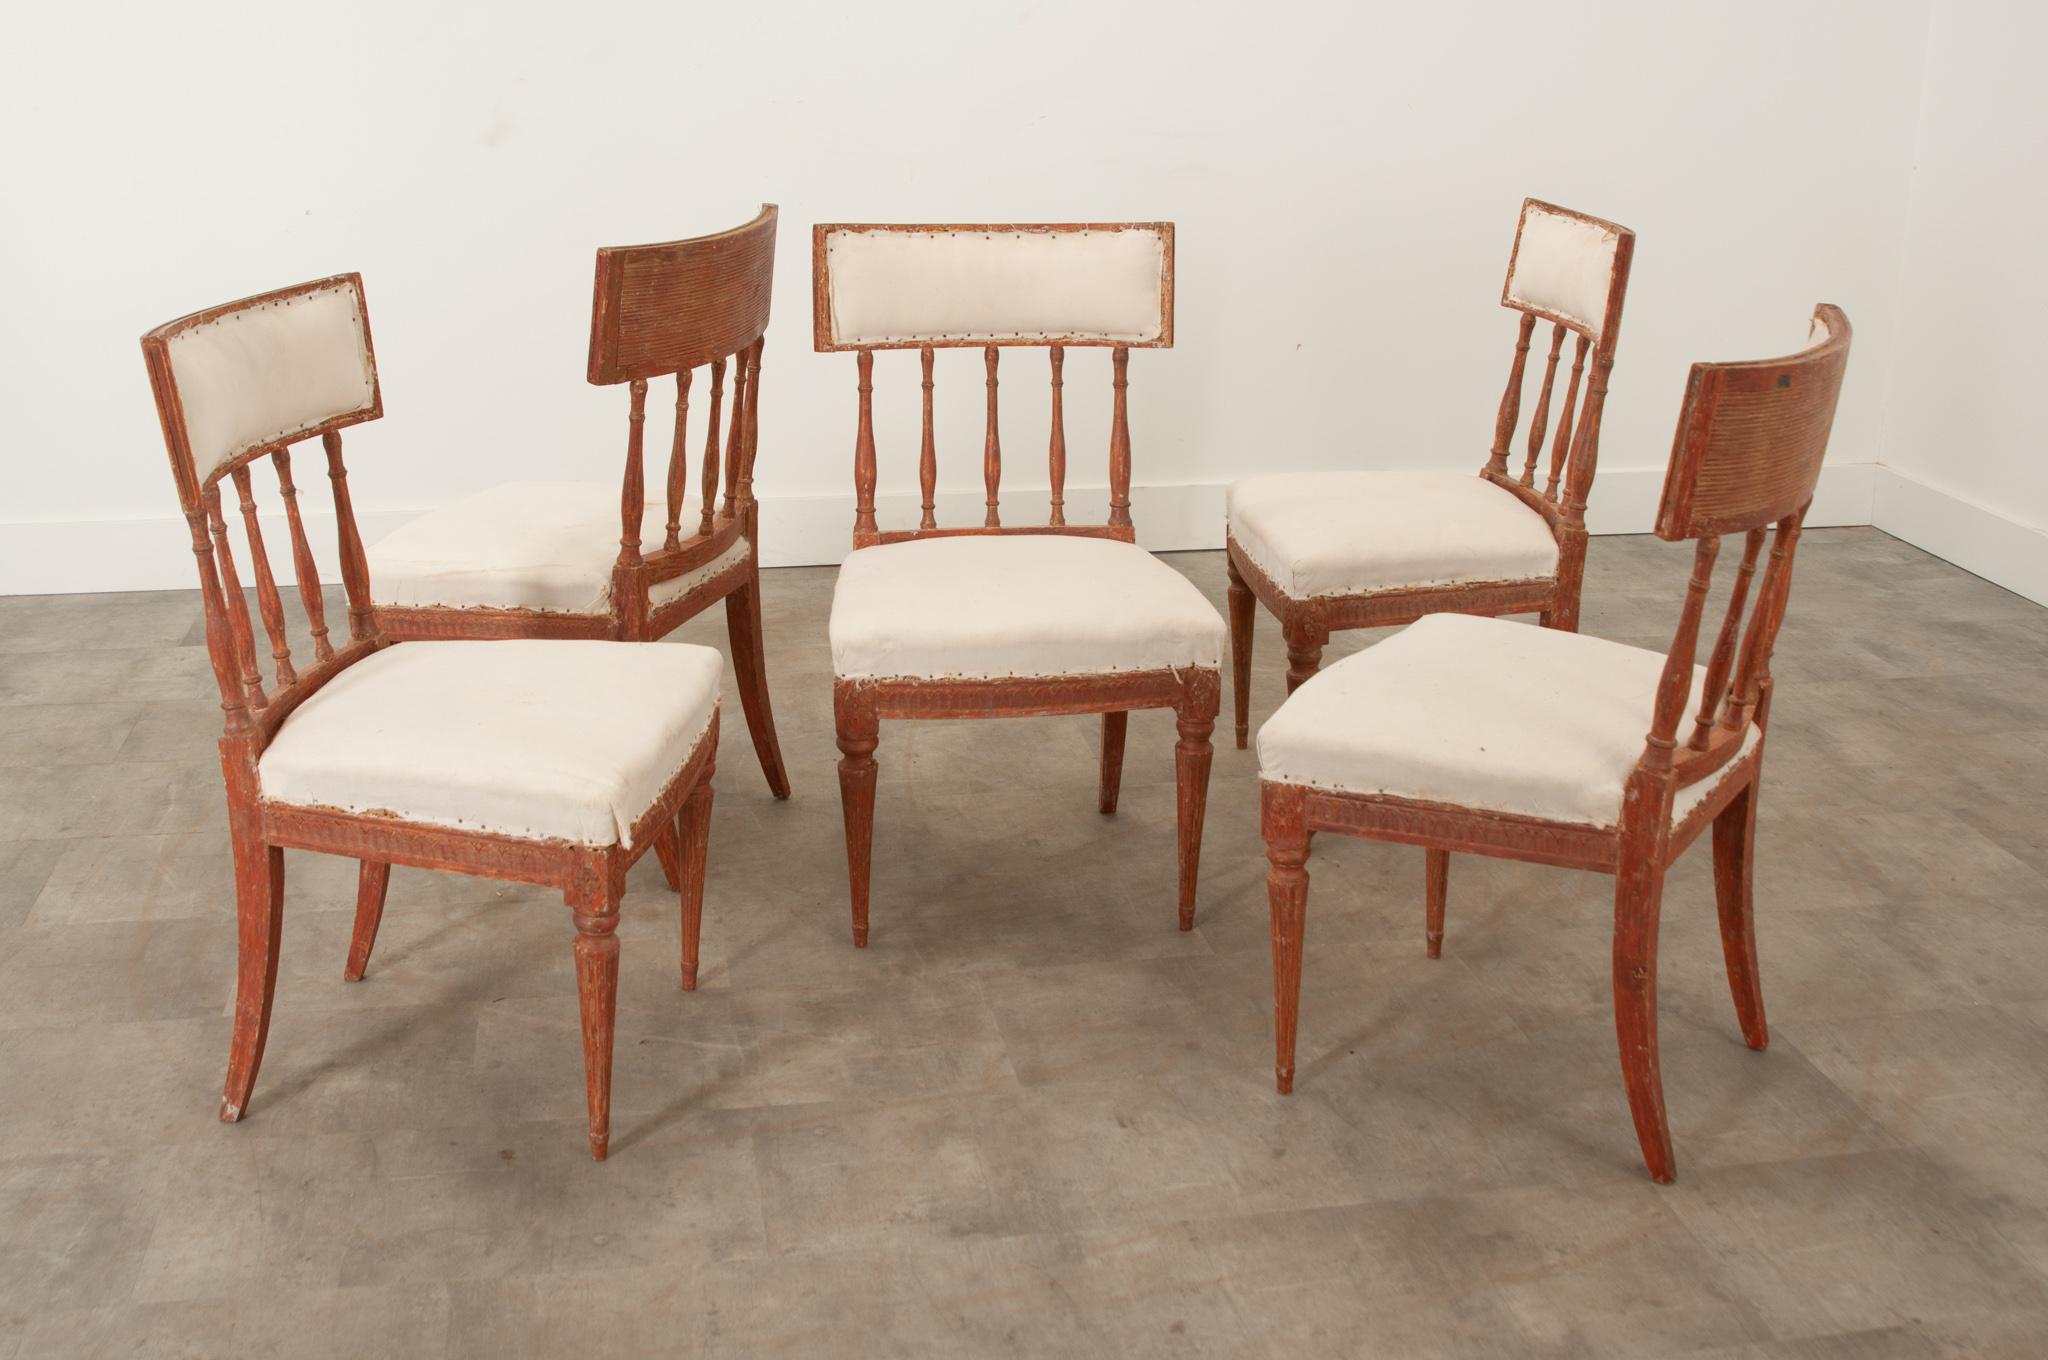 A set of five Gustavian style dining chairs, circa 1810, with fantastic potential in any space. The curved back rests feature reeding details on the back and seem suspended by turned spindles. Lambs tongue carving on the apron is interrupted by